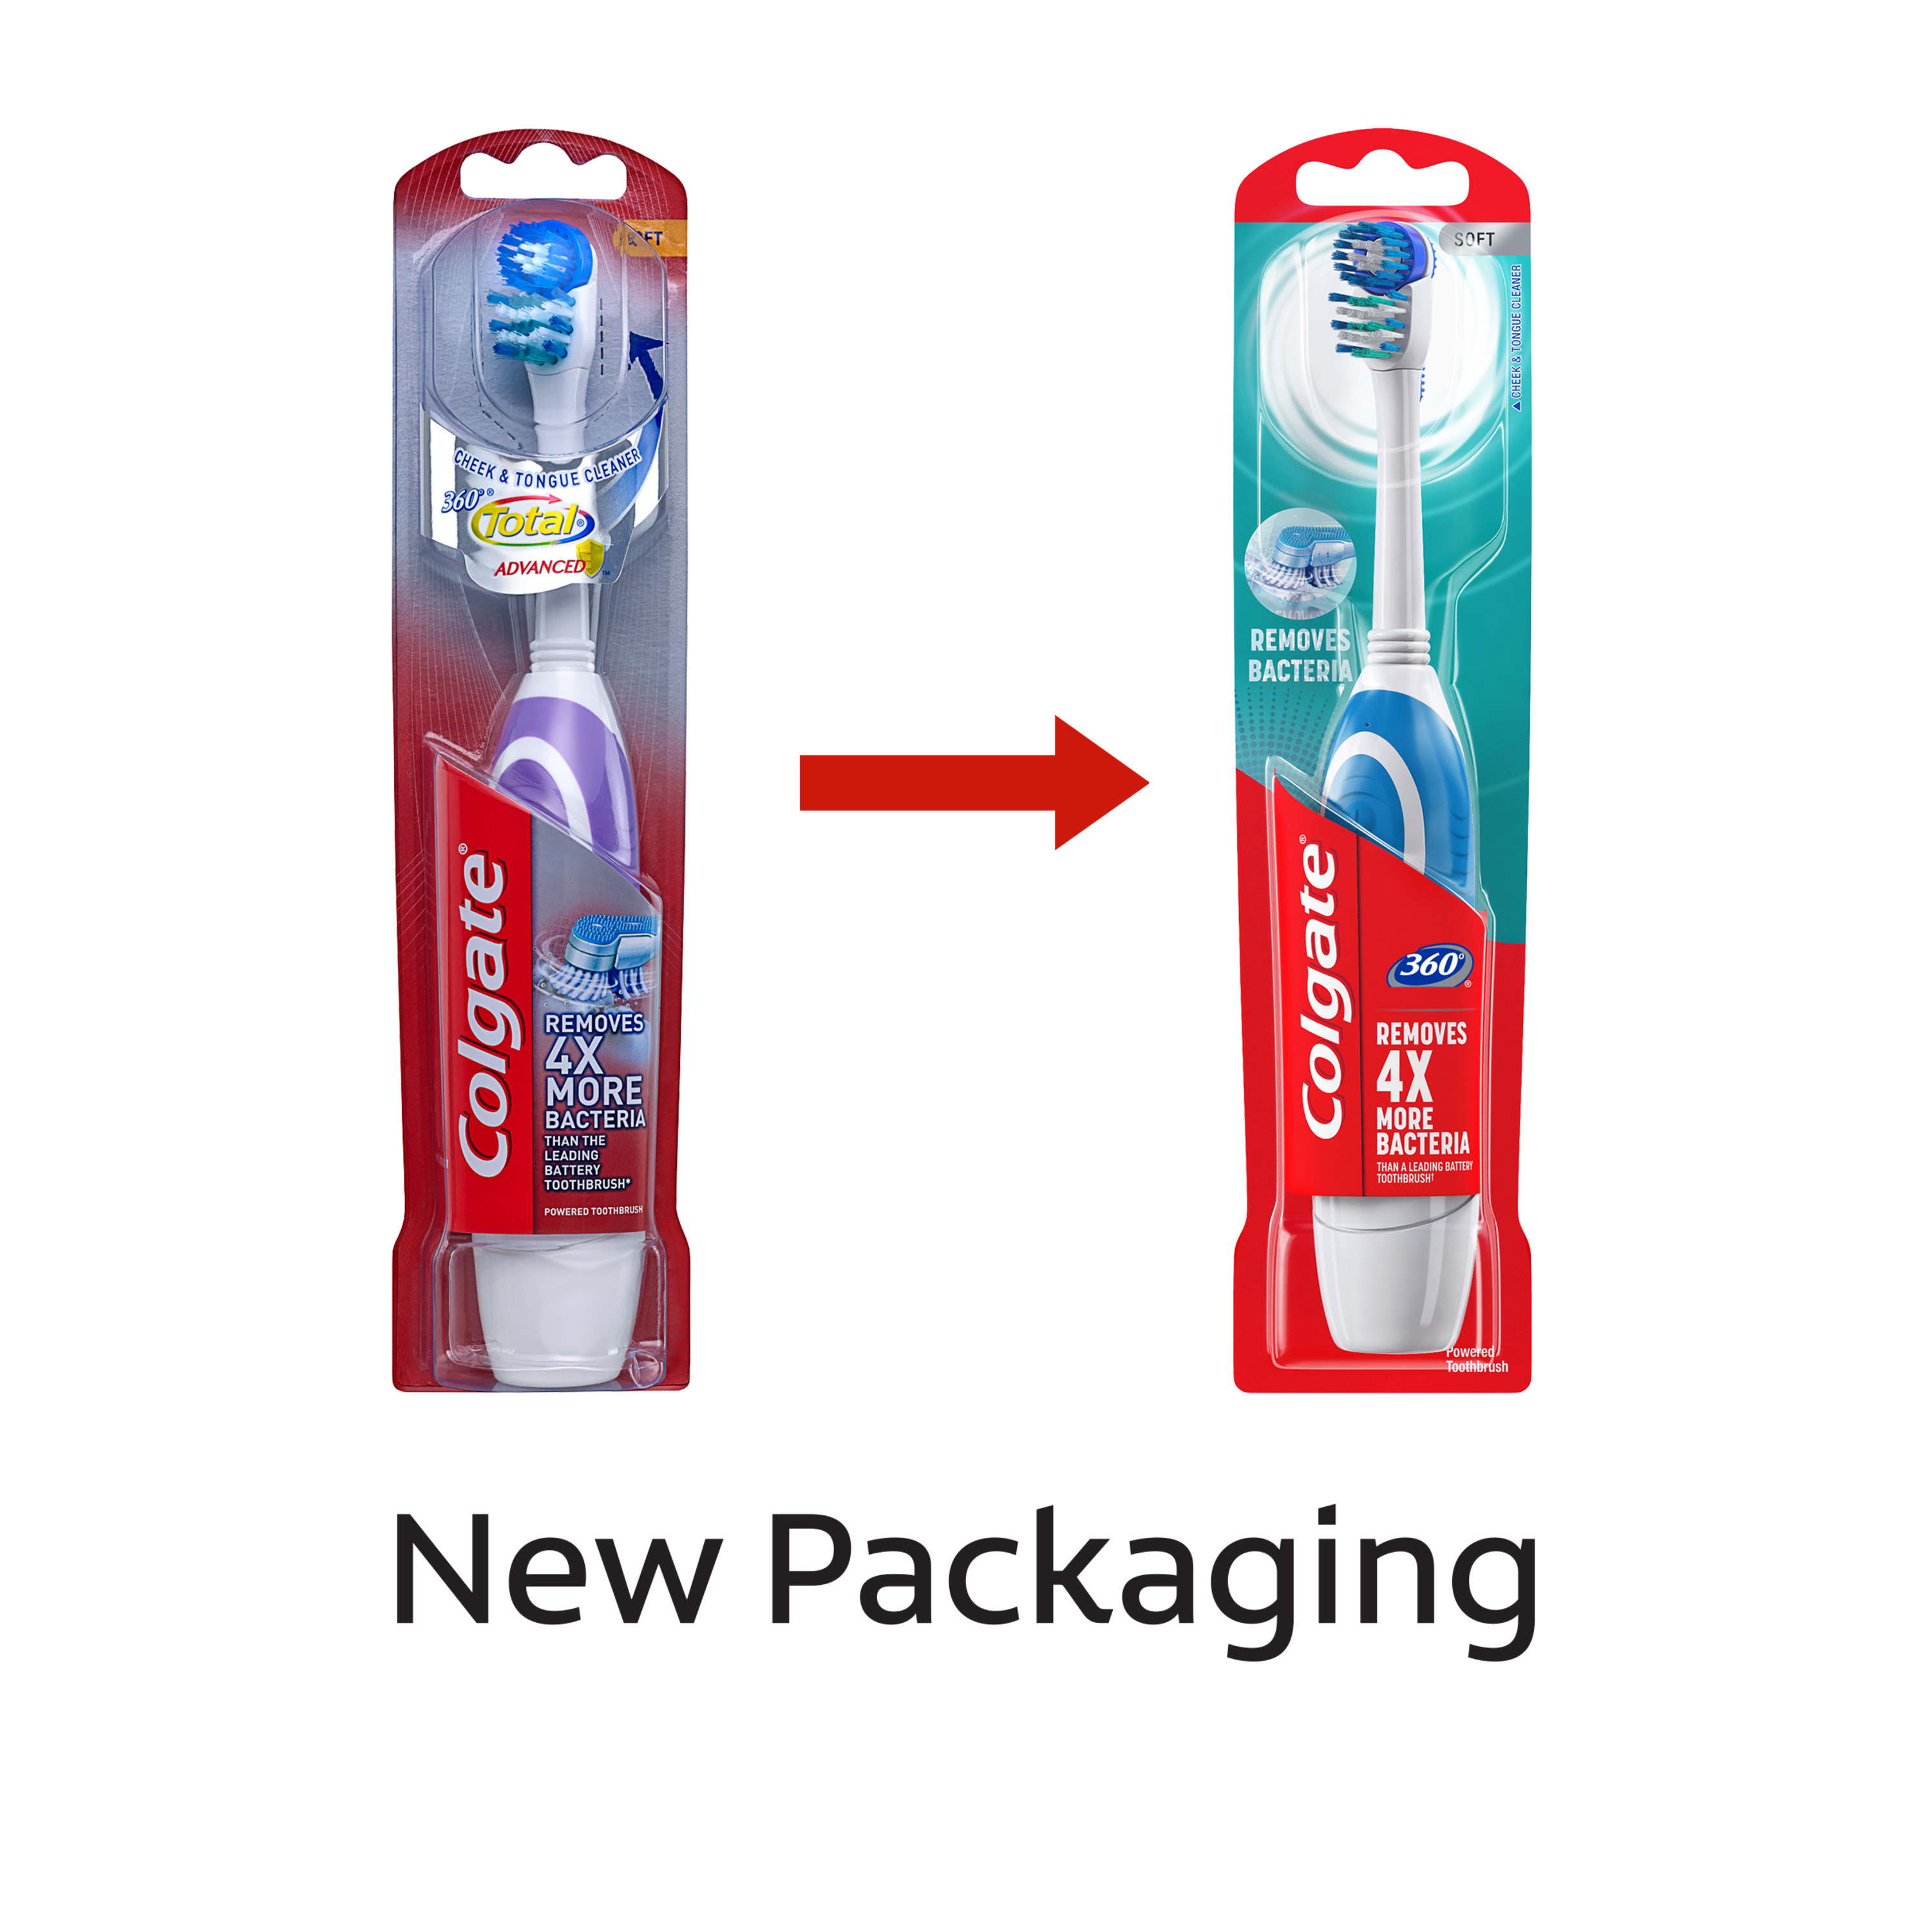 Colgate 360 Advanced Battery Powered Toothbrush with Cheek & Tongue Cleaner - image 1 of 8